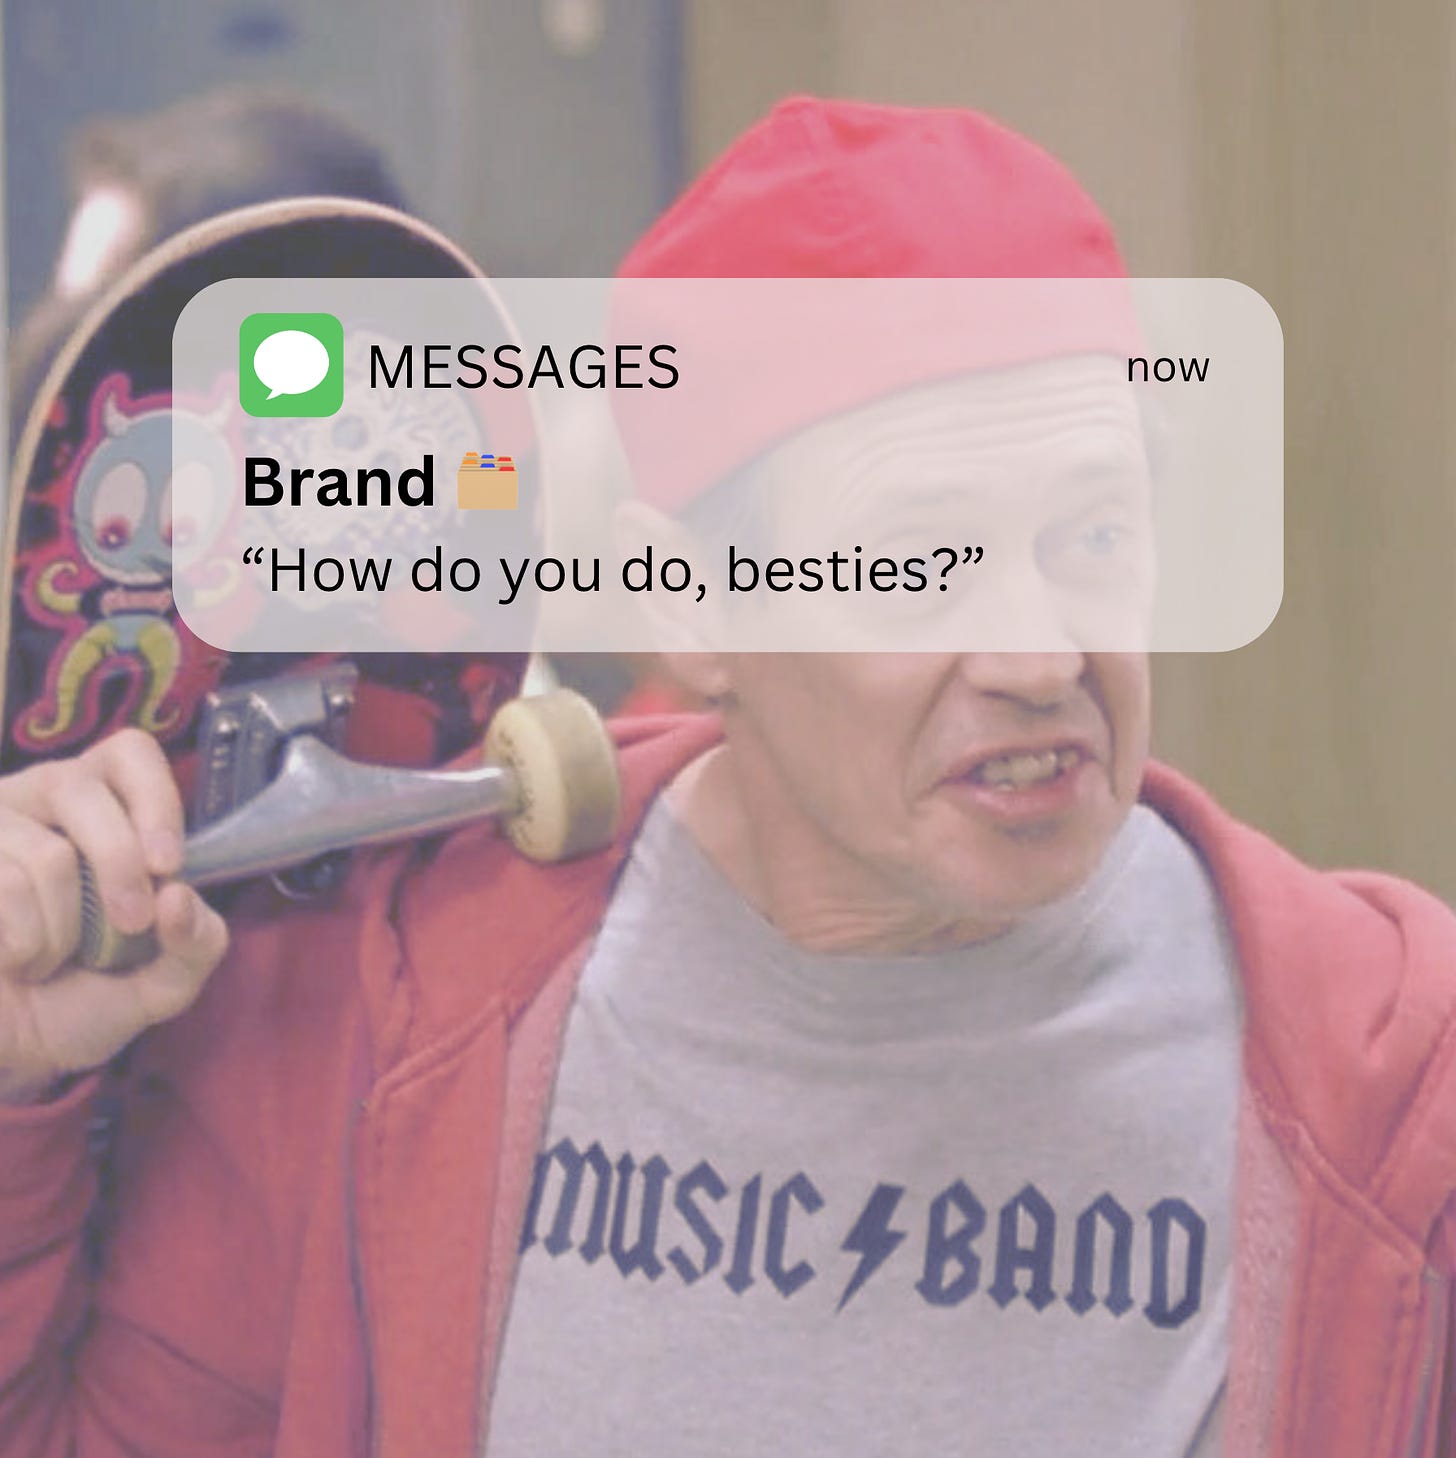 Background image is a man carrying a skateboard based on the meme: How do you do, fellow kids? The image in the foreground is a text message from a sender labeled "Brand" and says: How do you do, besties?